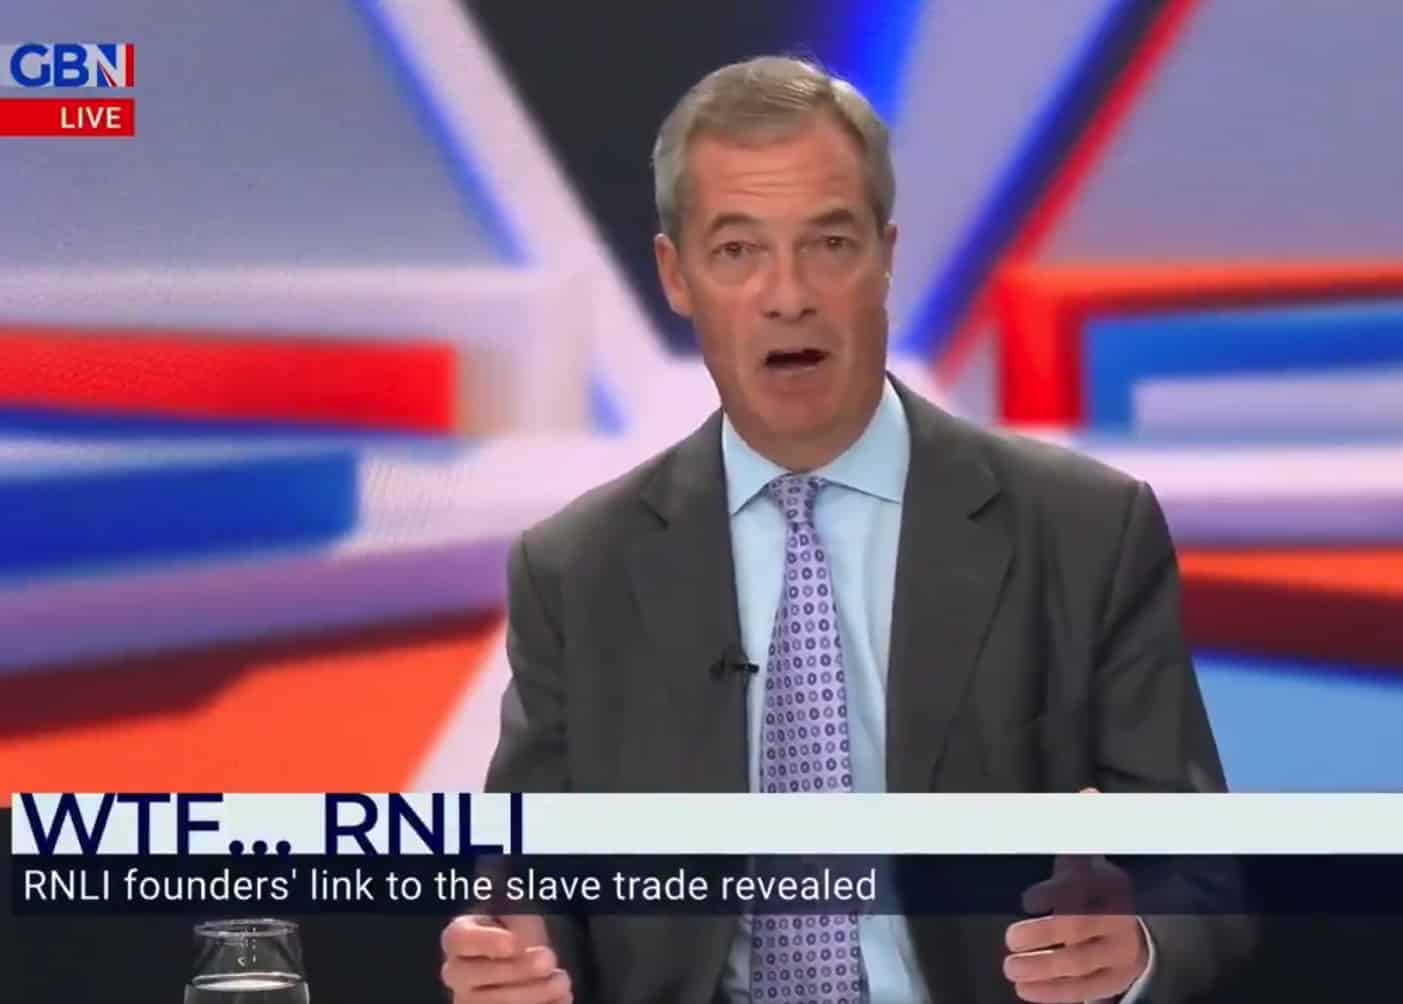 Nigel Farage aggrieved after ‘taxi for migrants’ comments raise £200k for the RNLI